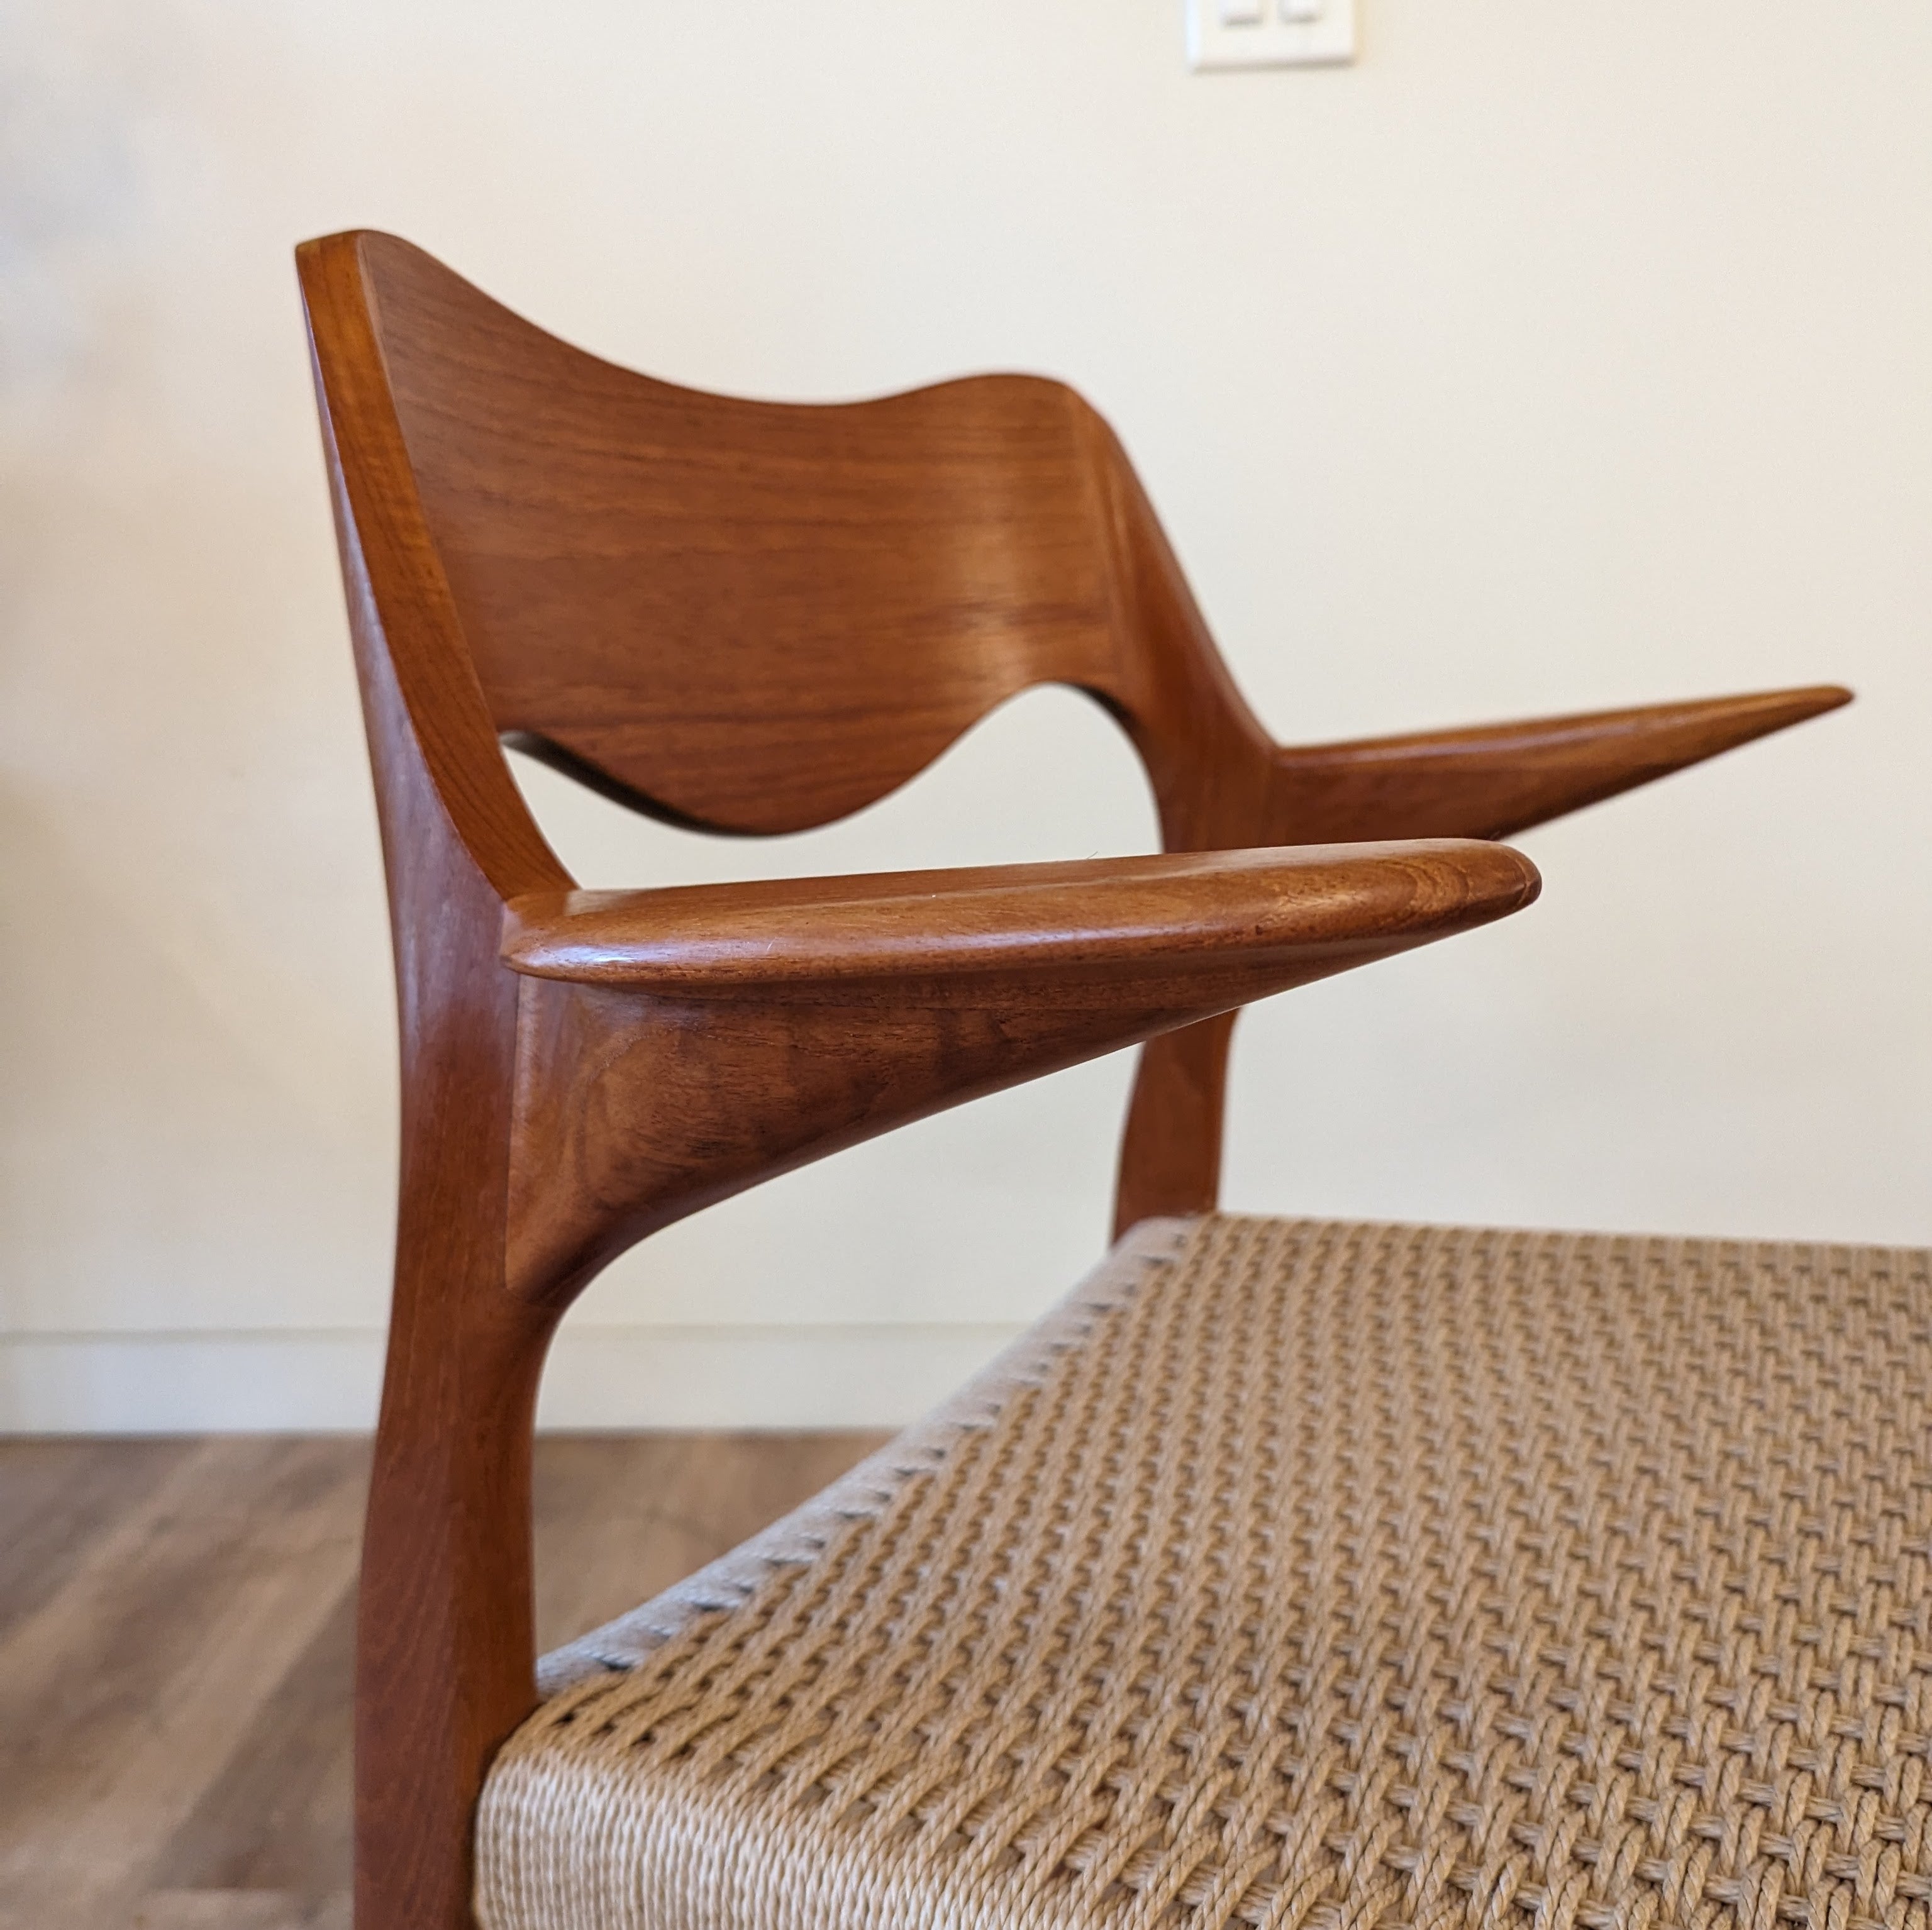 Niels Moller Dining Chair, #55